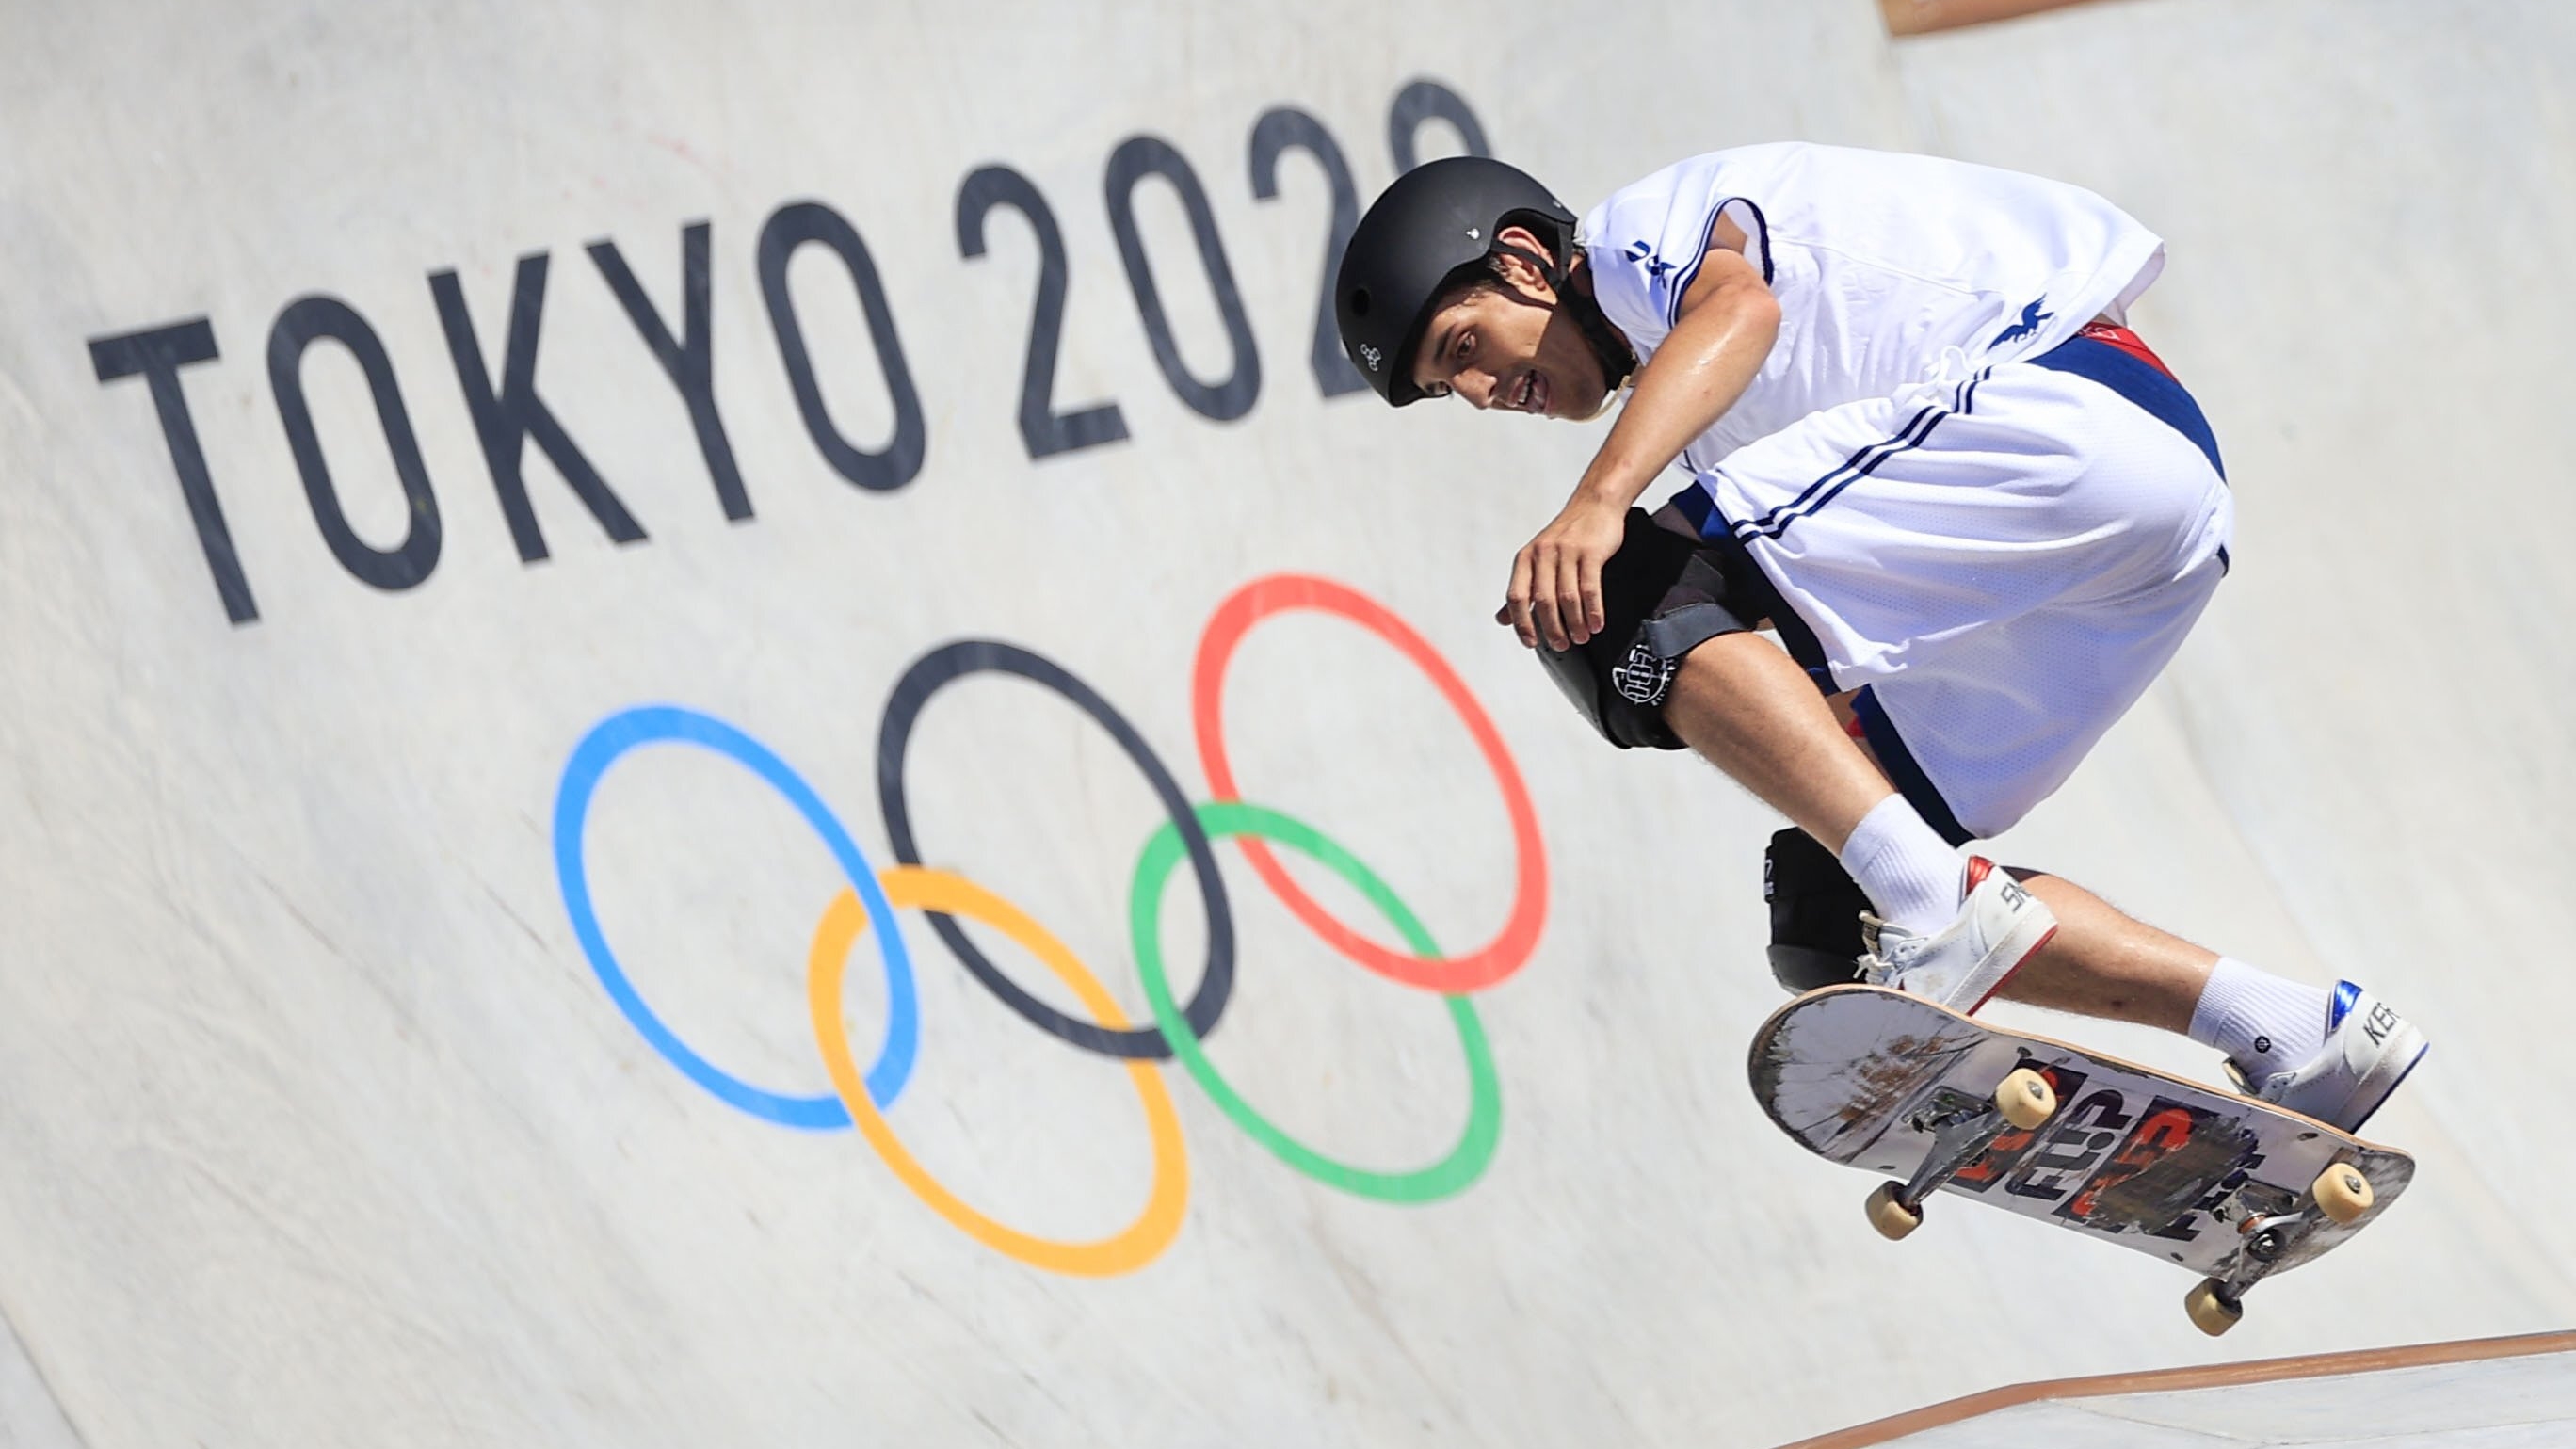 Skate or die: Thrasher culture and how it could change future Olympics